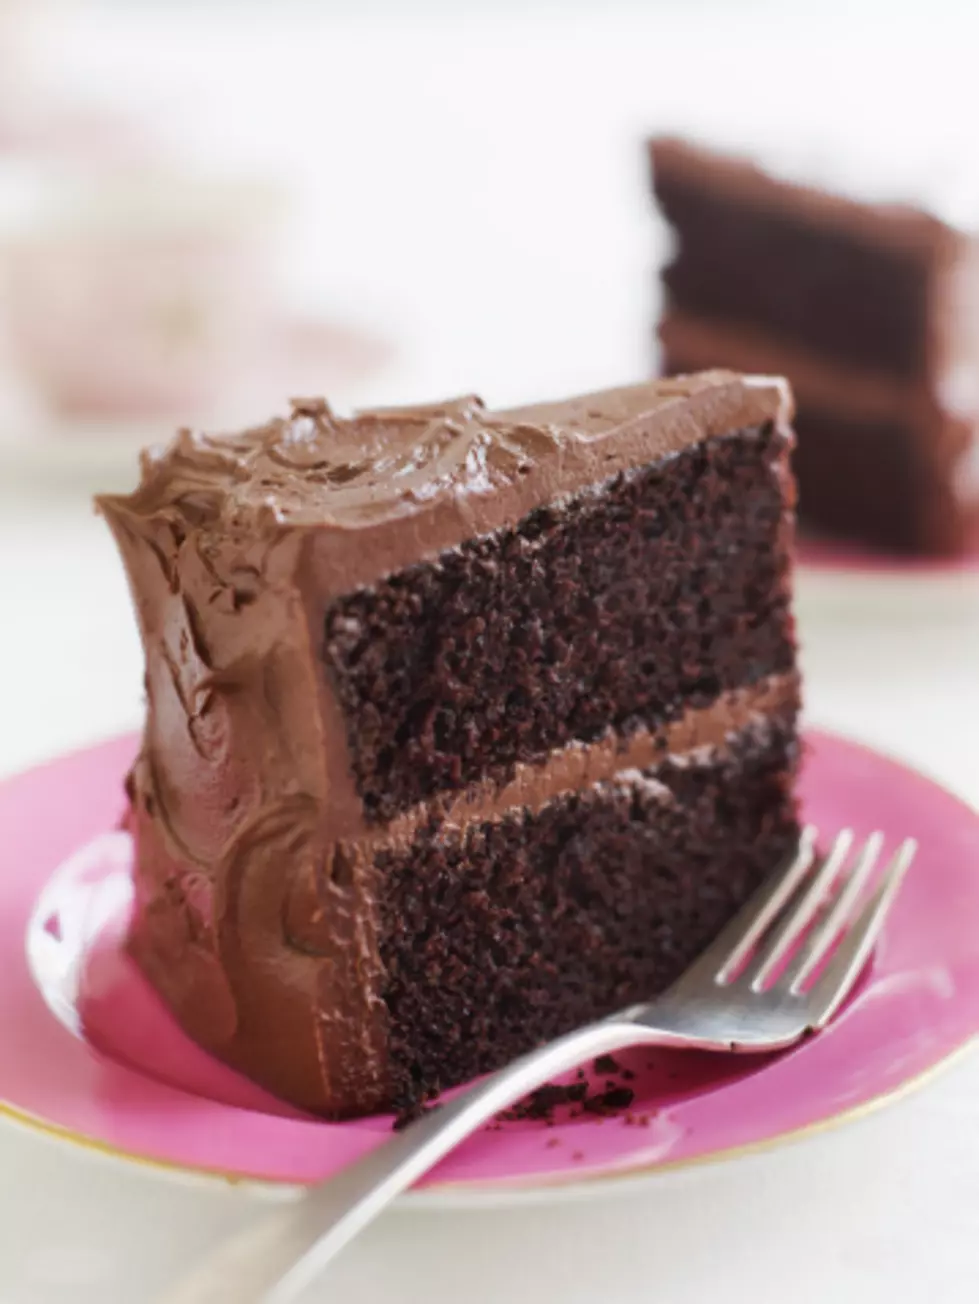 Today Is National Chocolate Cake Day!